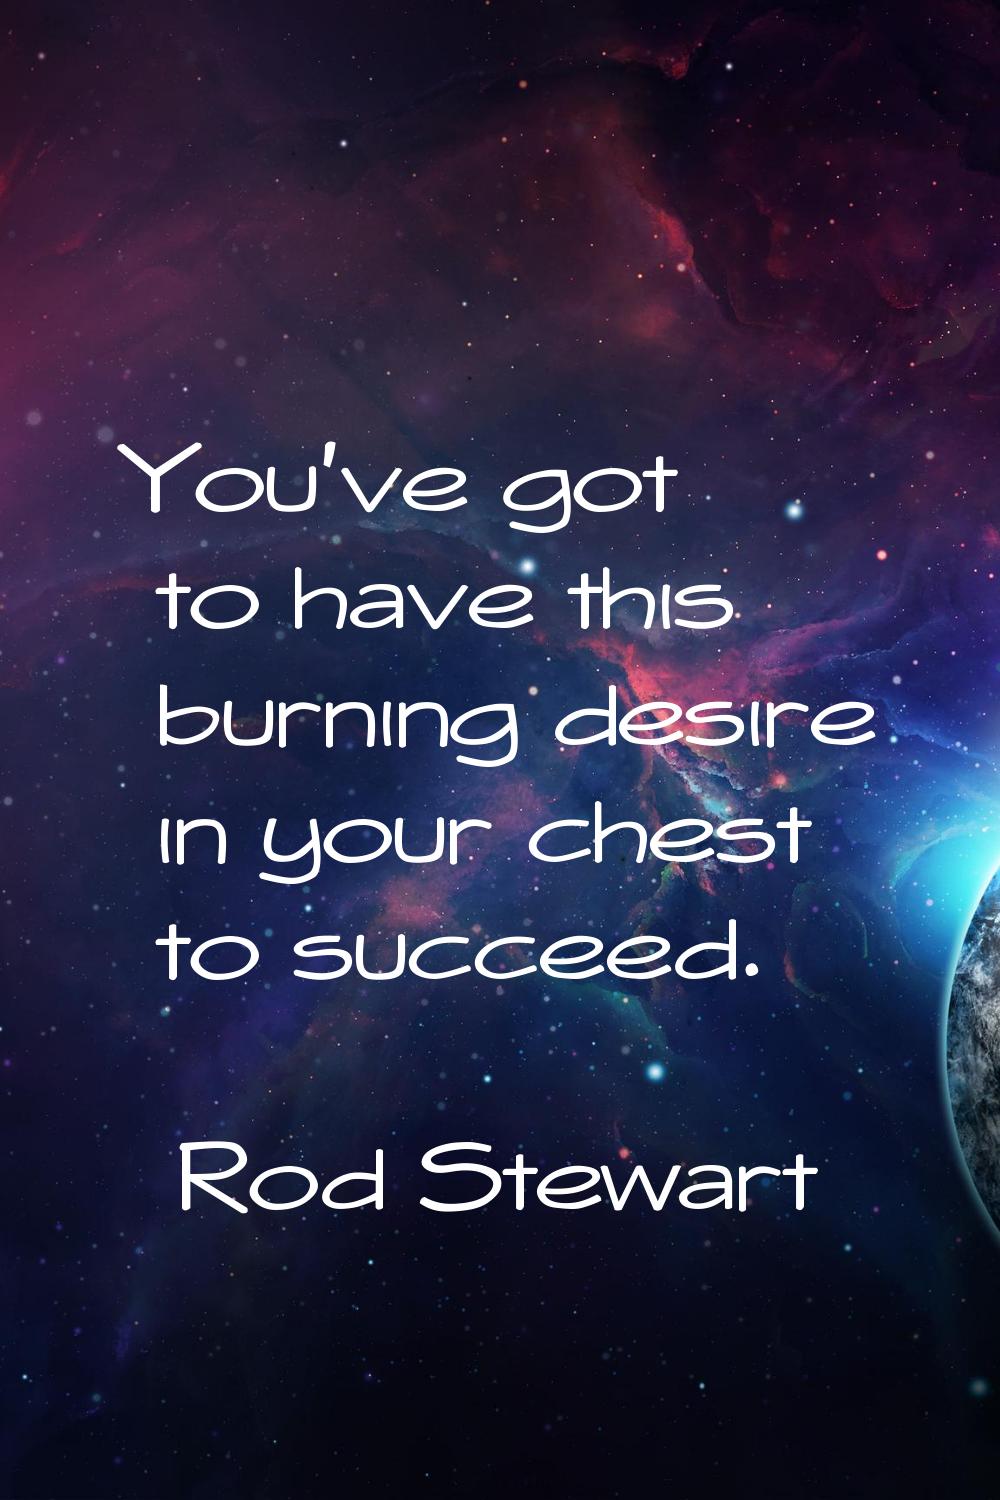 You've got to have this burning desire in your chest to succeed.